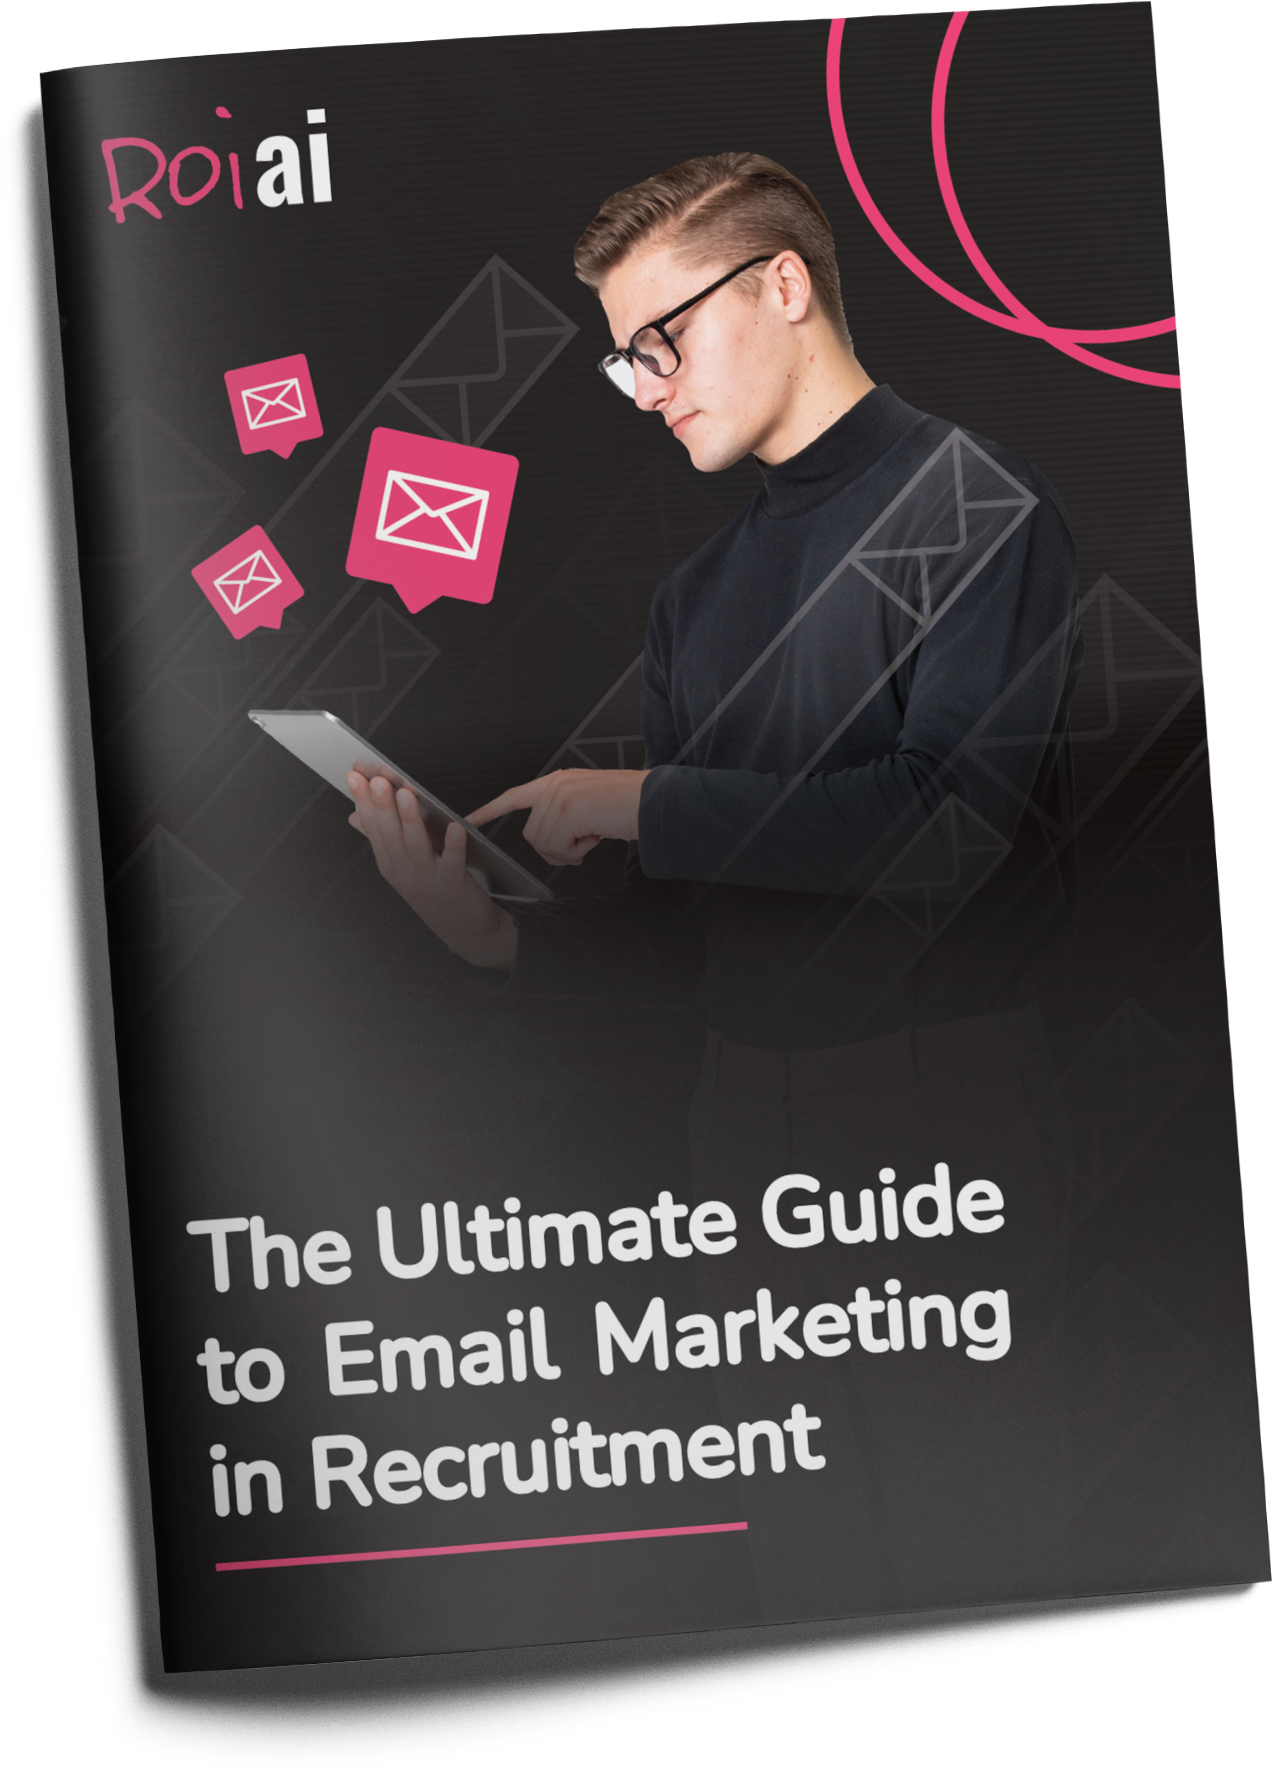 The Ultimate Guide to Email Marketing in Recruitment